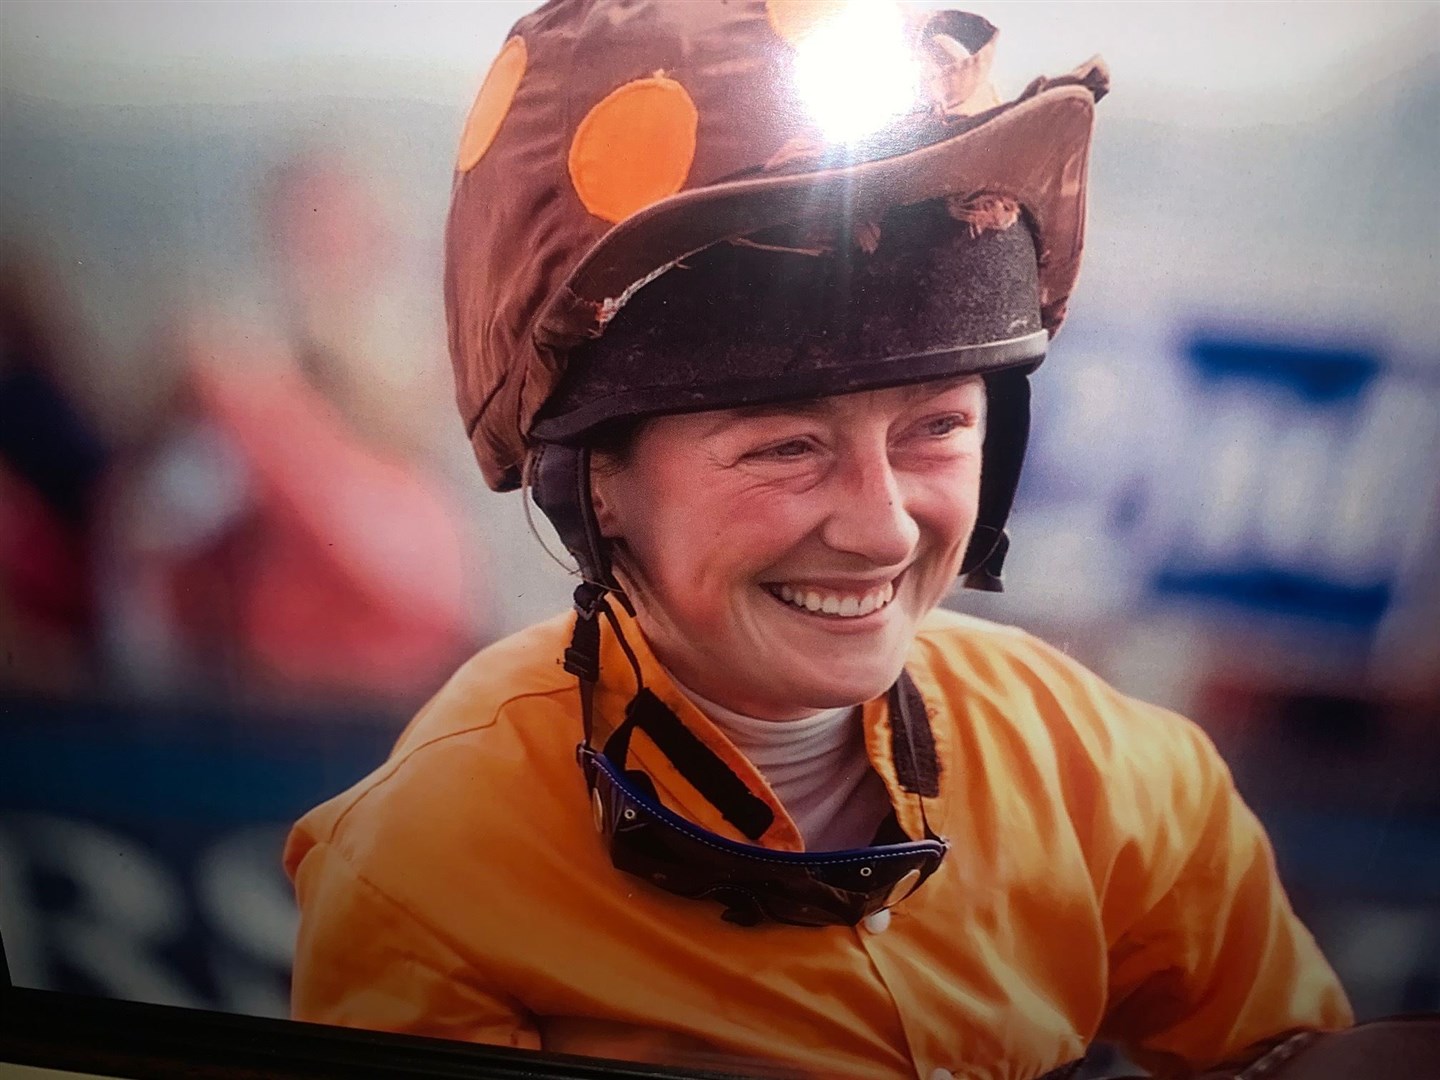 Lorna Brooke died from injuries sustained in a horse-riding accident. She has been described as "one in a million".